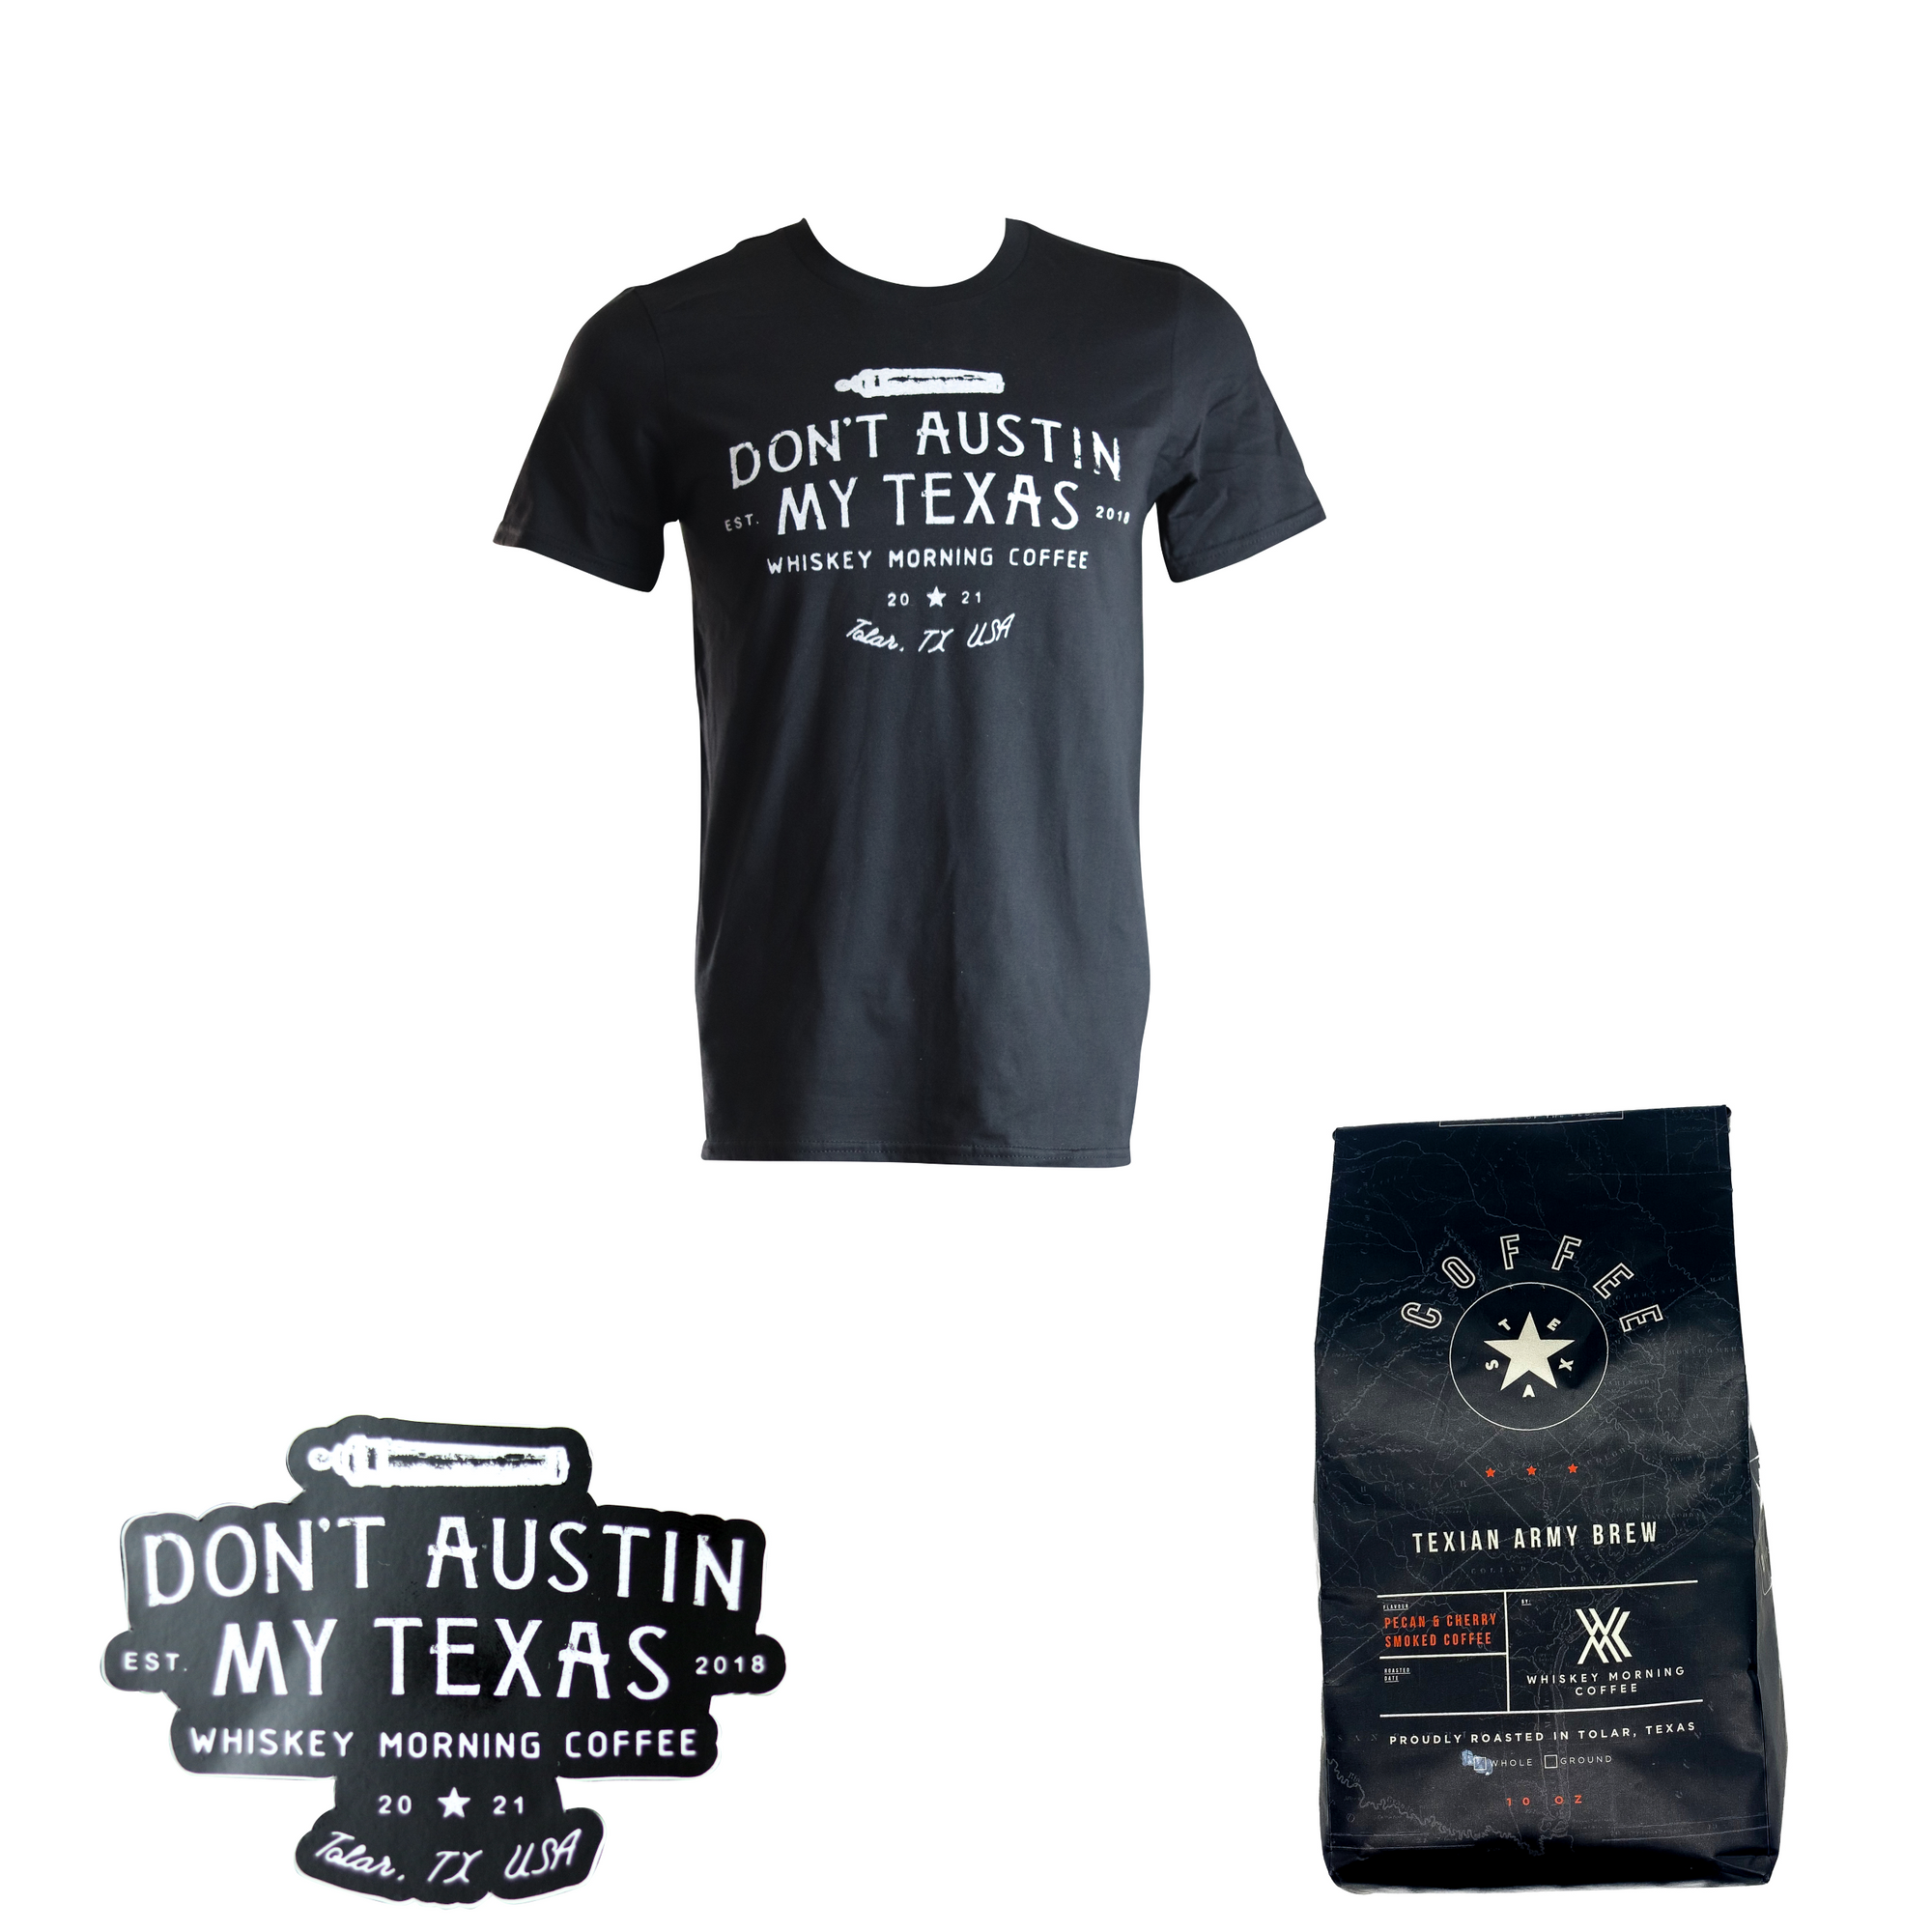 Includes a bag of texian army coffee, dont austin my texas shirt, and sticker